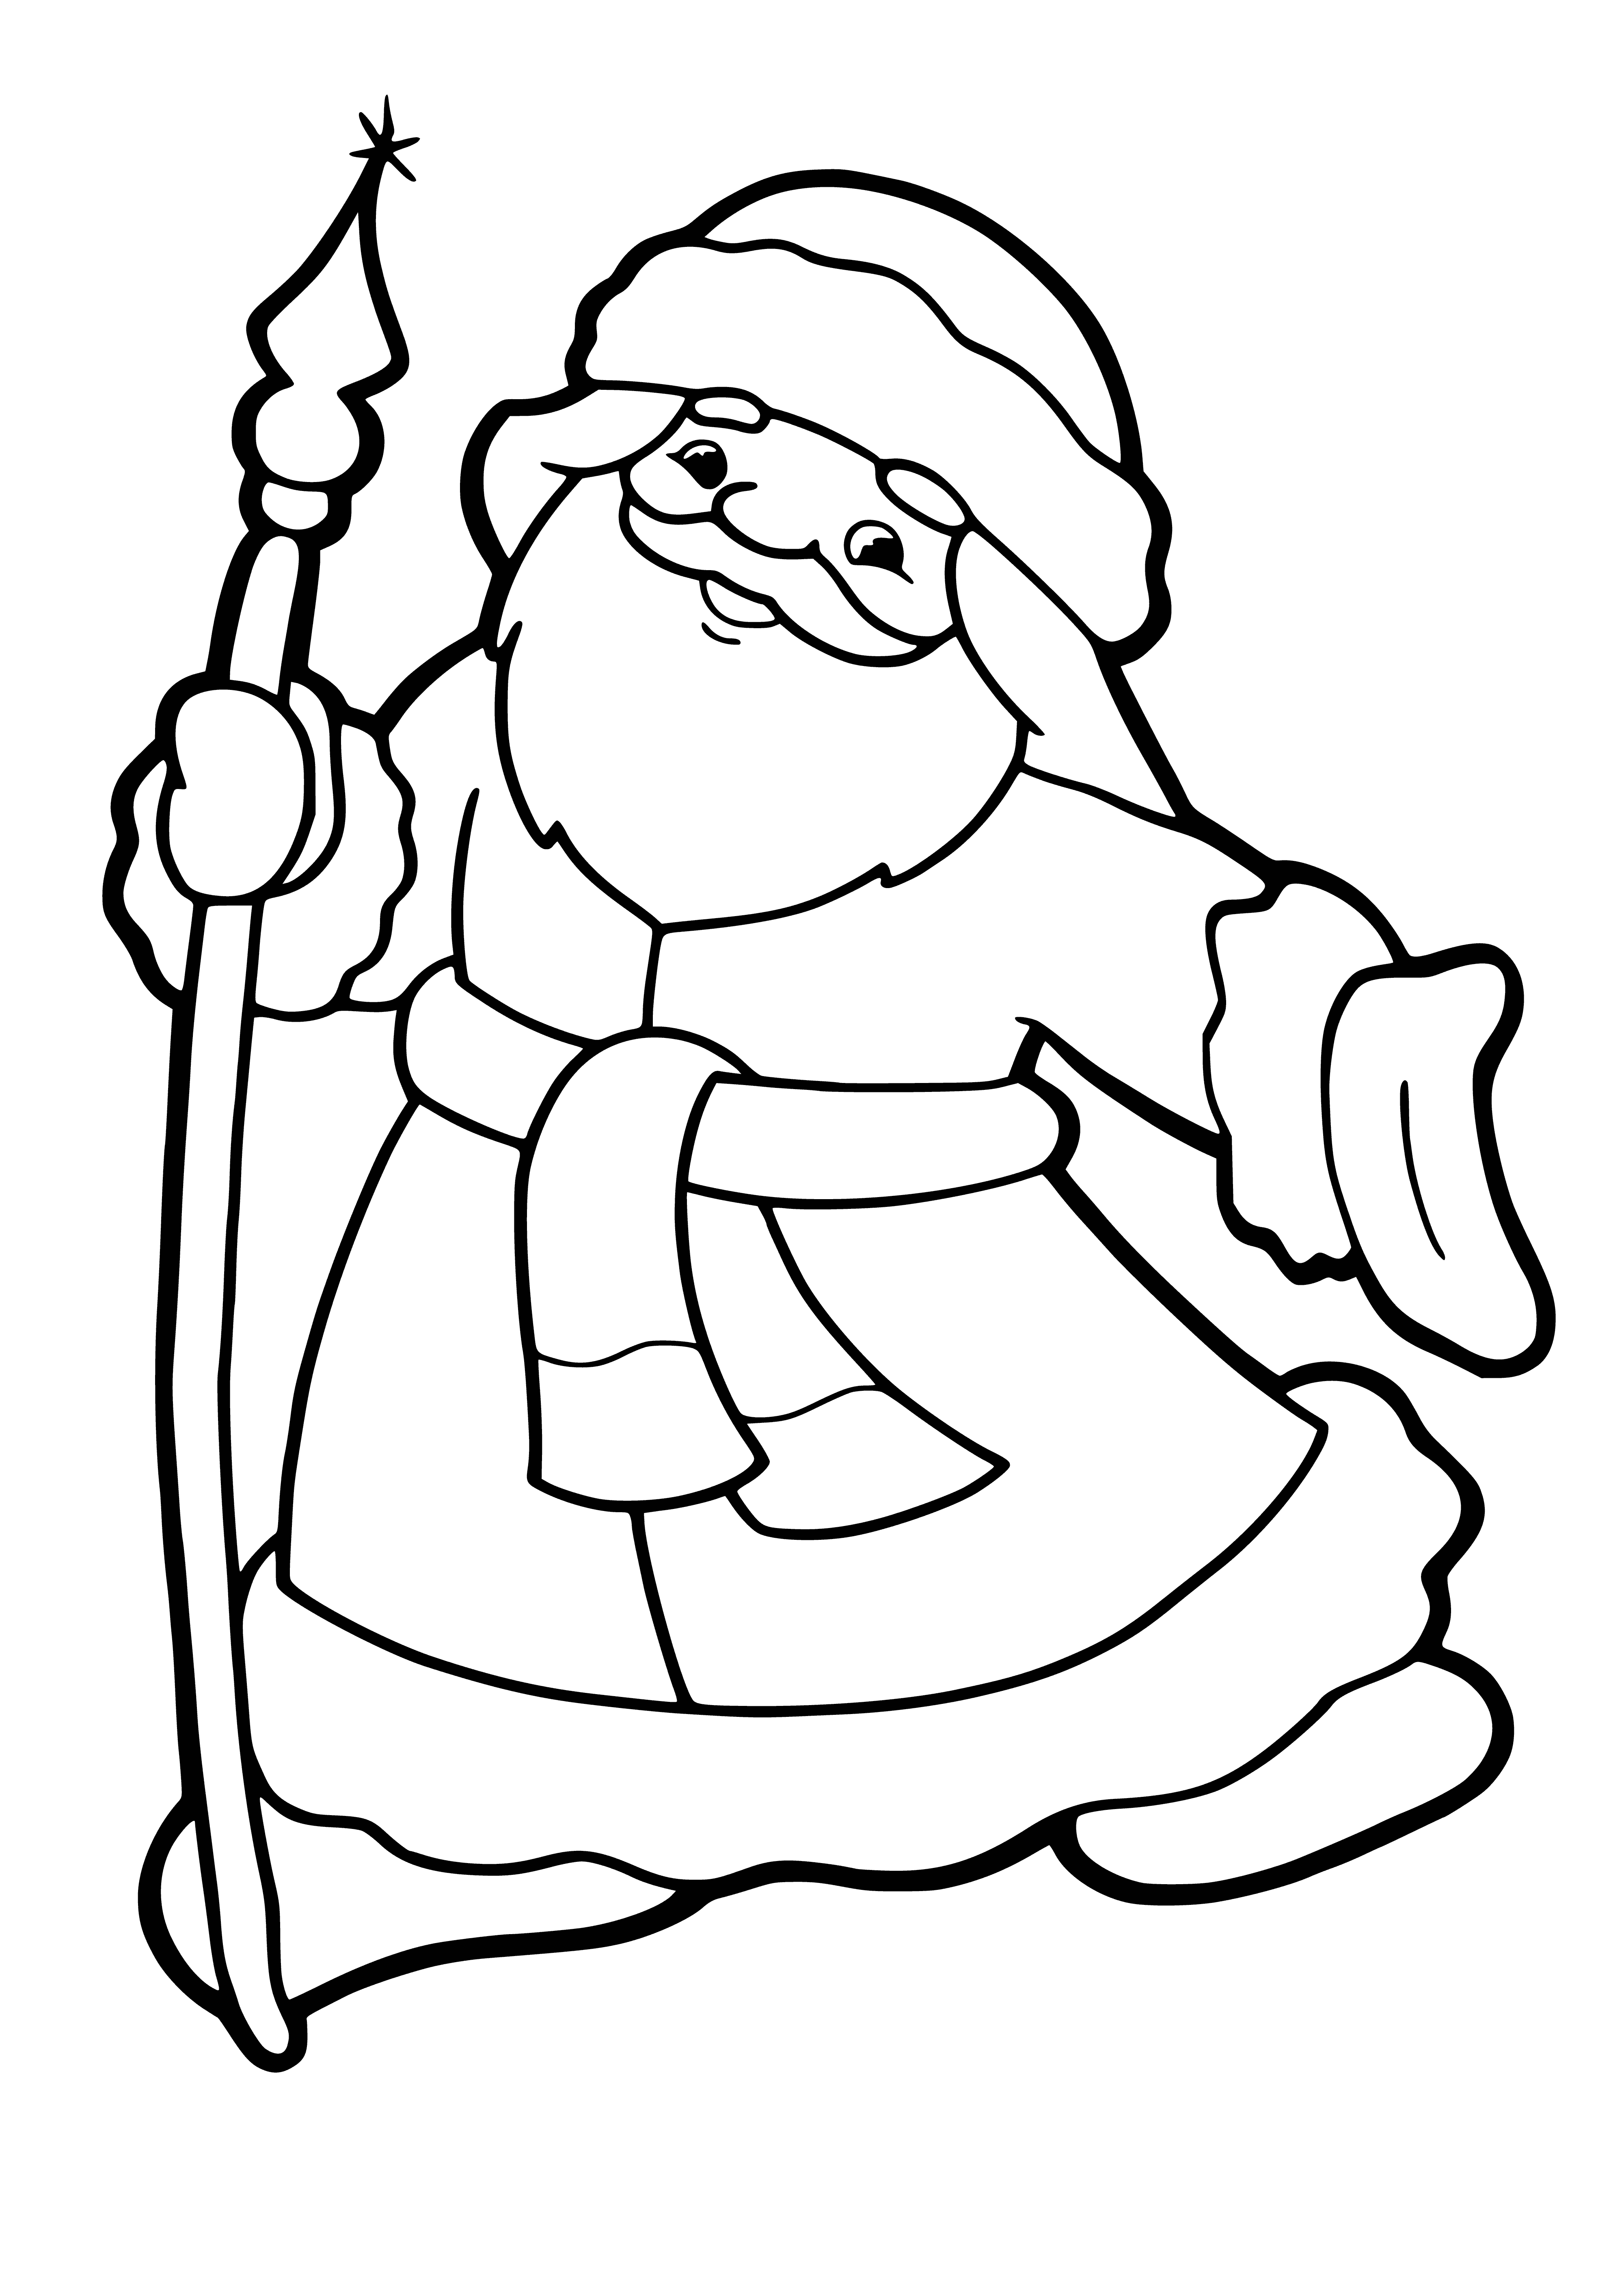 coloring page: Jolly Santa Claus holds gifts by a cozy fireplace with a festive Christmas wreath.